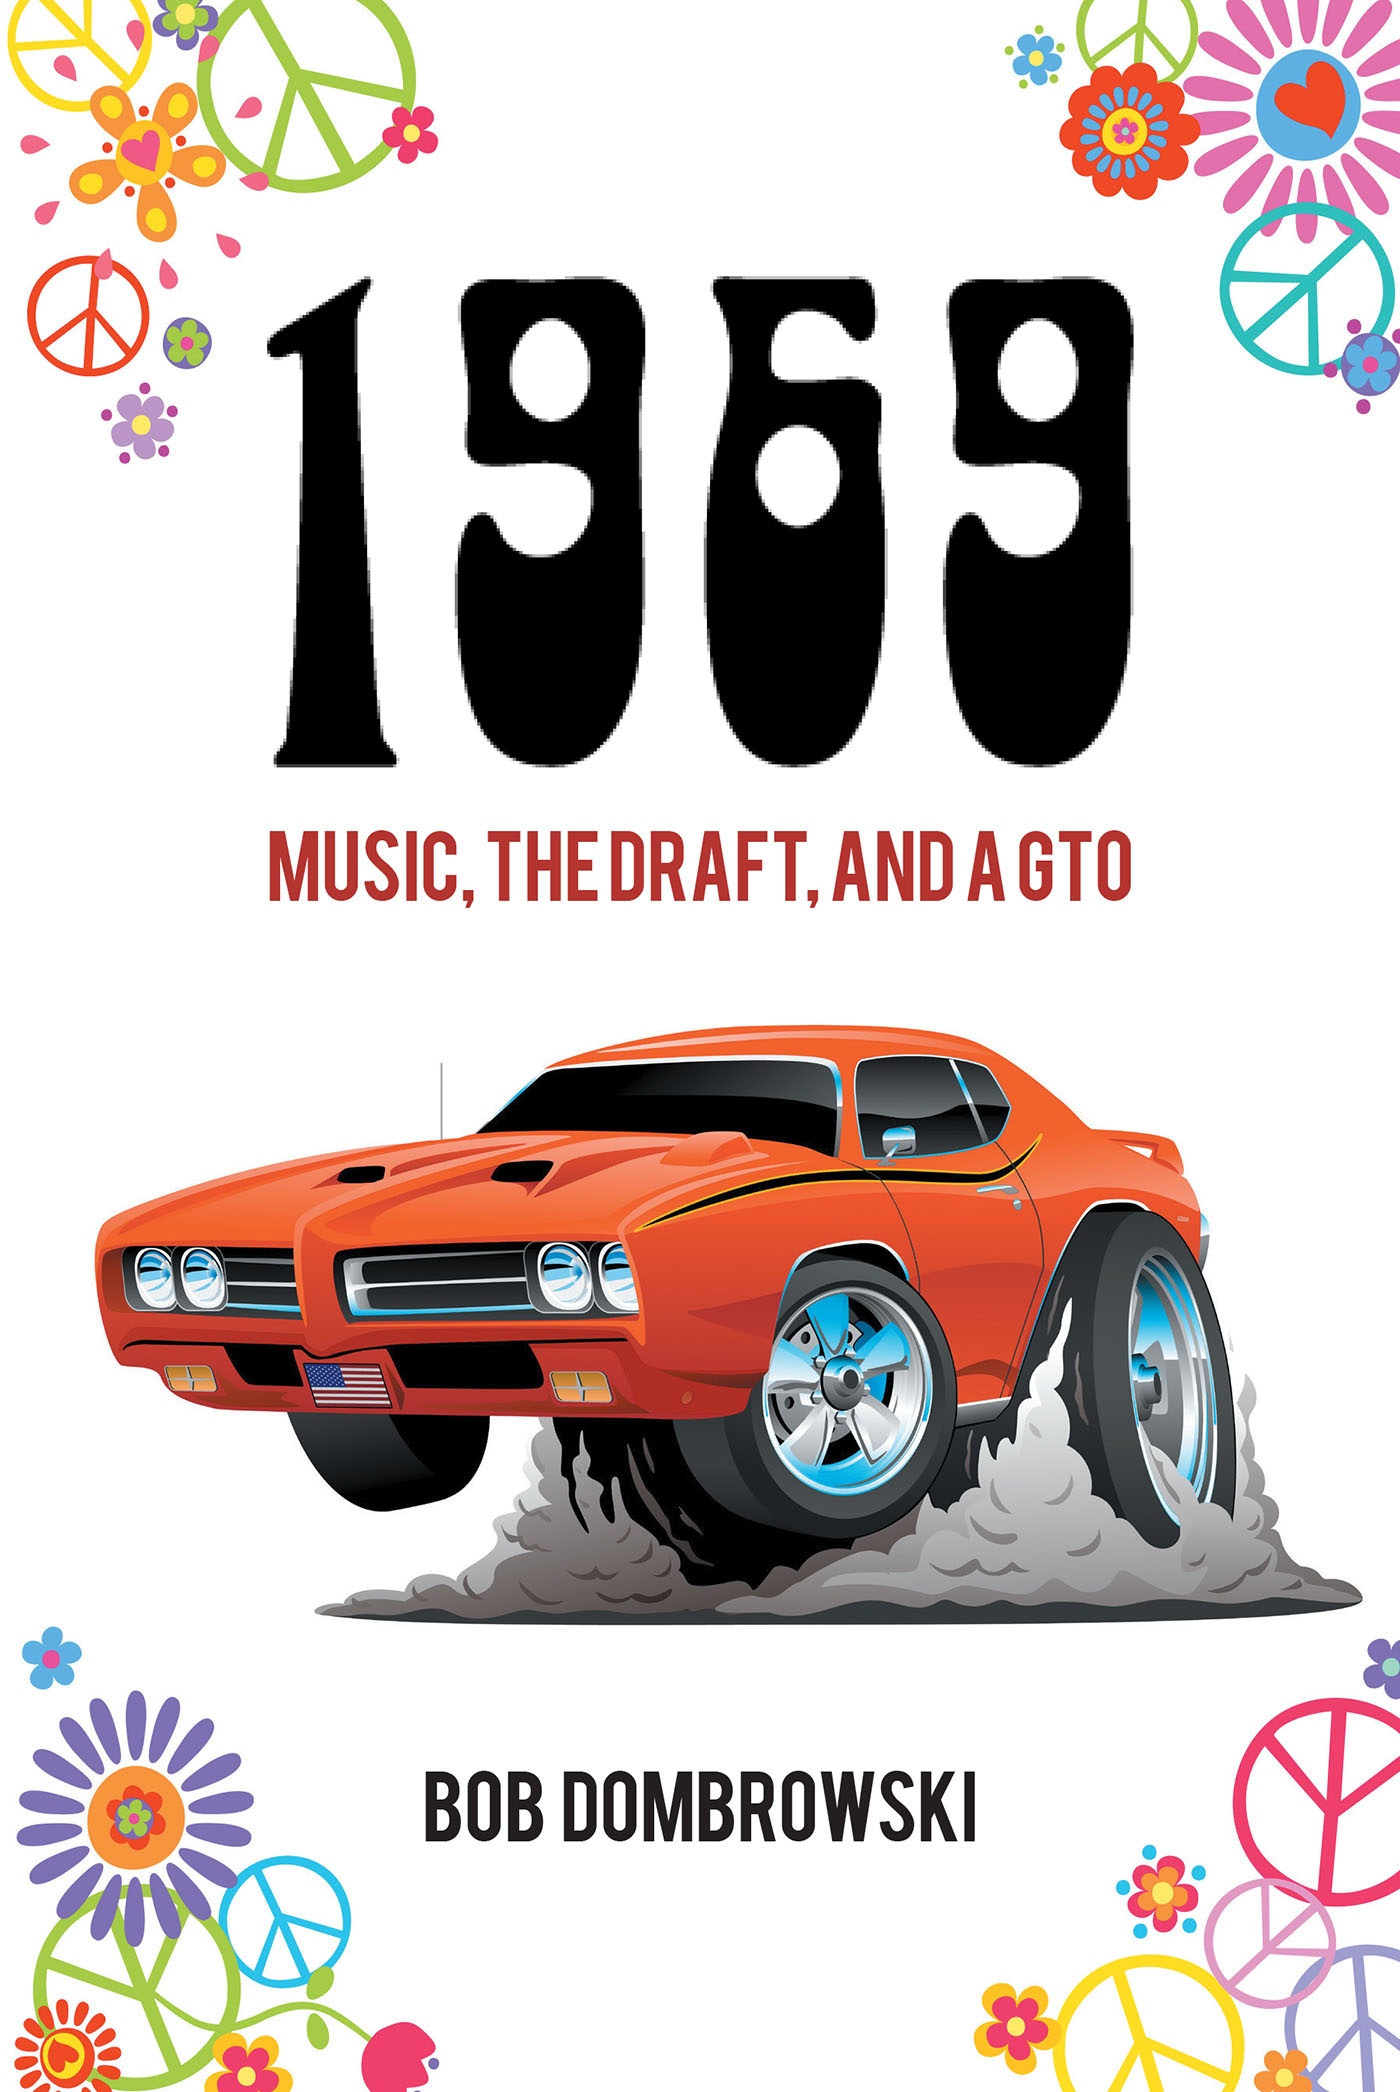 Author Bob Dombrowski’s New Book, “1969: Music, the Draft, and a GTO,” Follows a Group of Friends as They Witness a Shift in American Culture & History in the Making